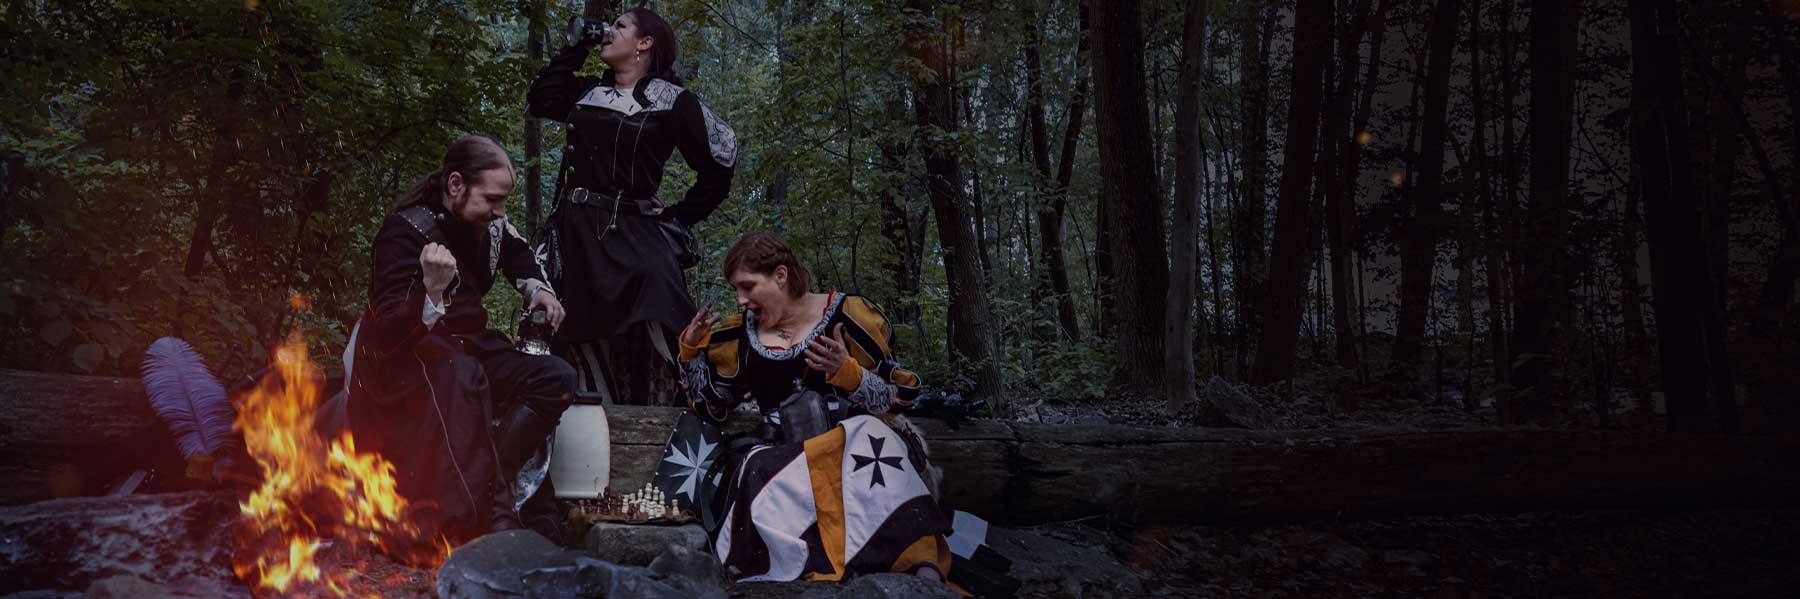 3 characters in Larp near of firecamp playing at chess and showing your guild heraldy for our custom service 